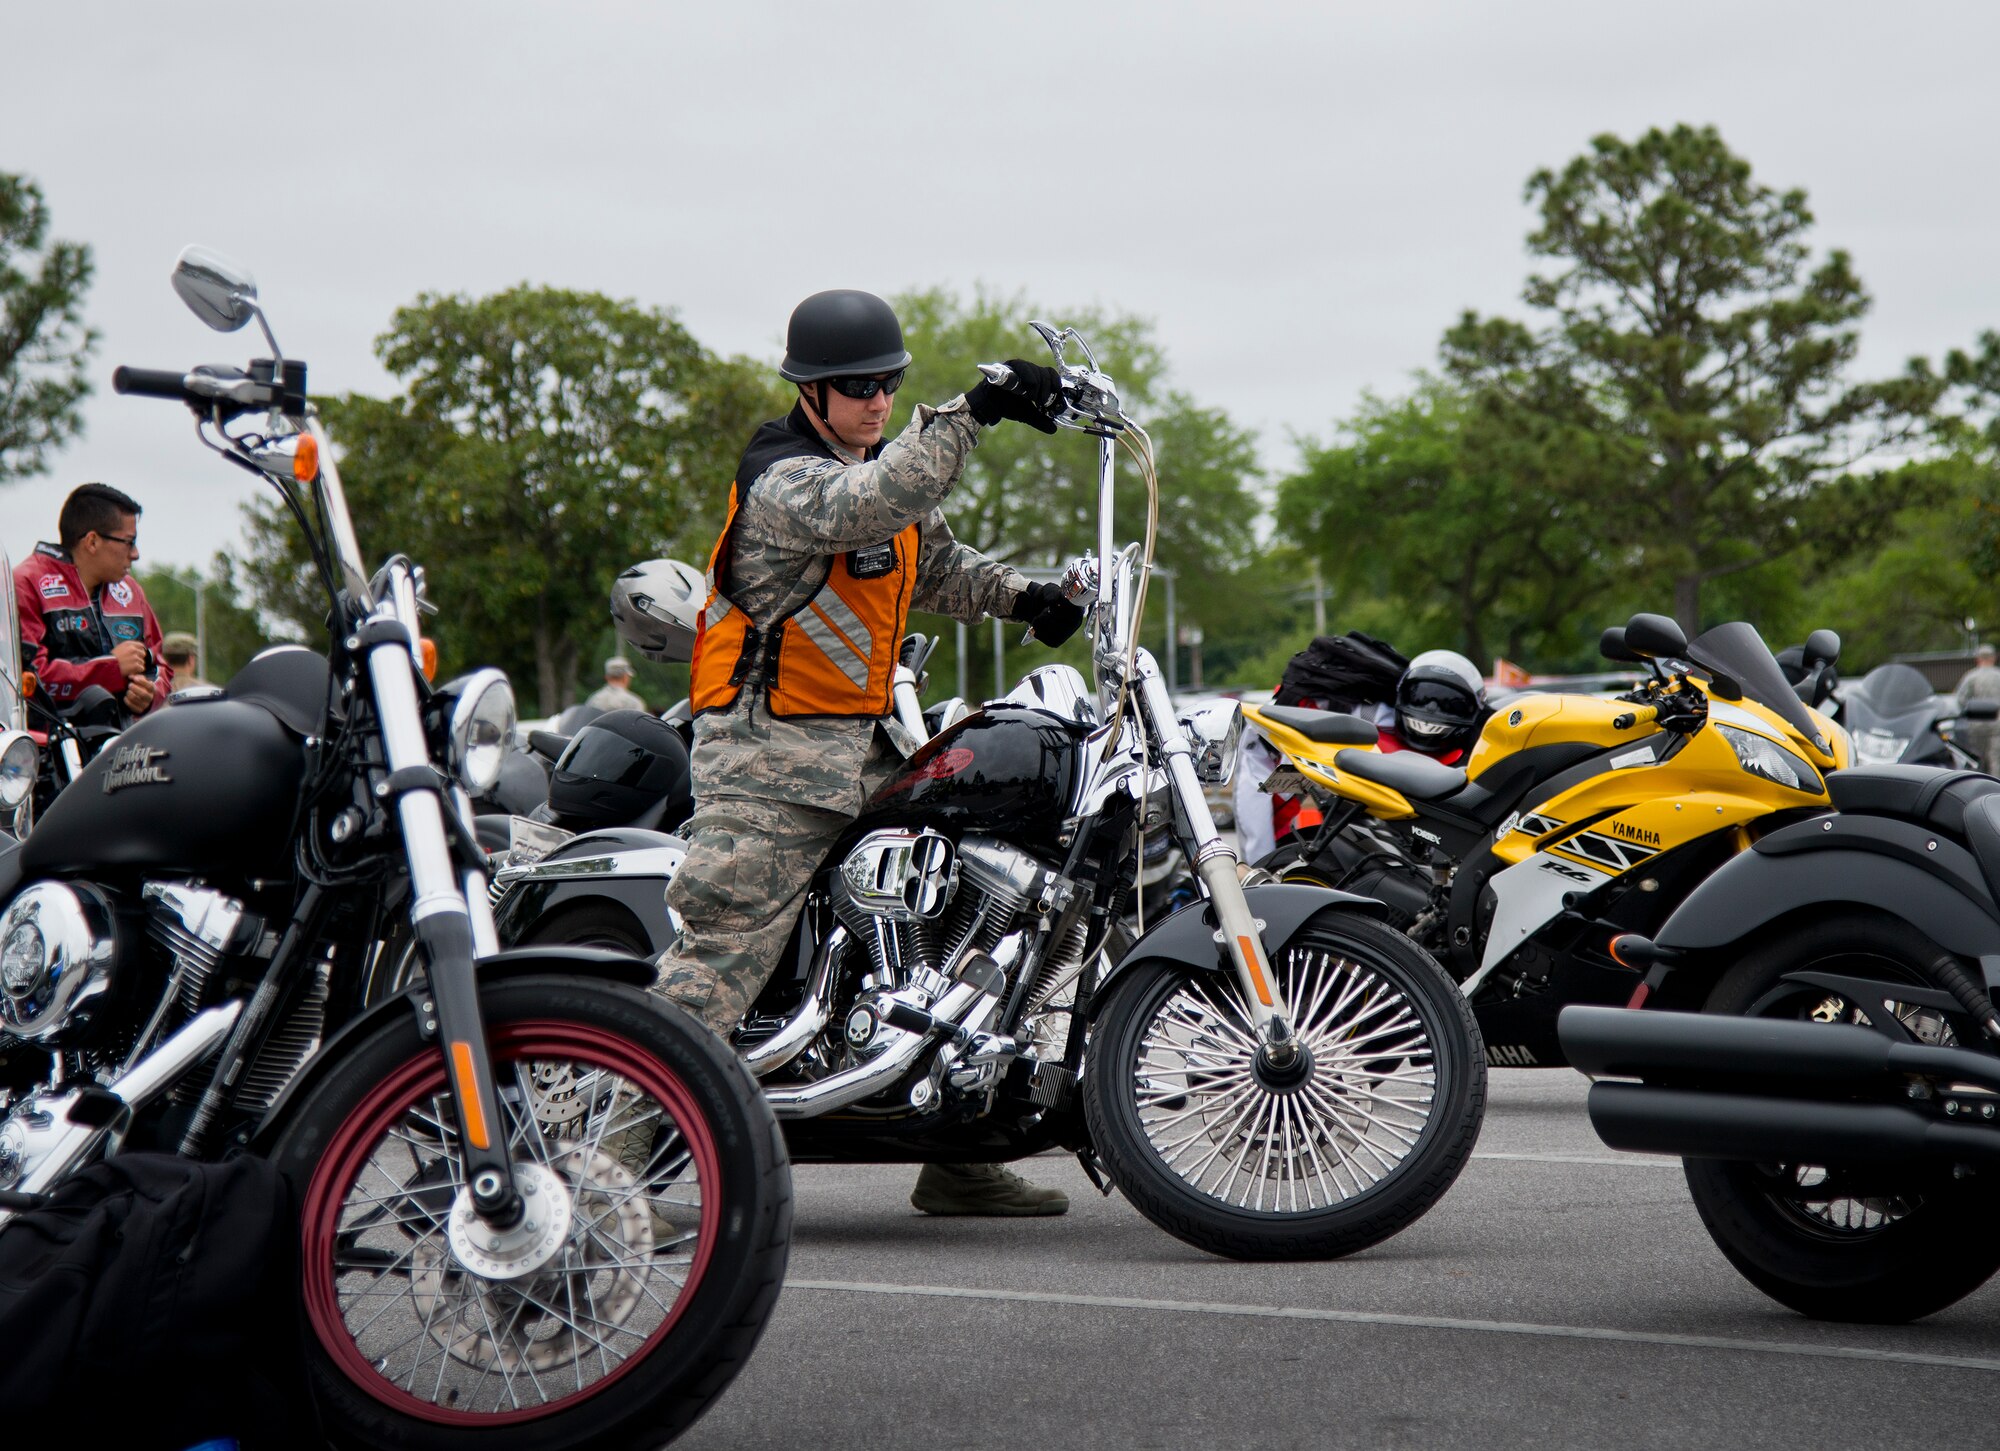 An Airman maneuvers his bike before heading out after the base’s annual motorcycle safety rally April 15 at Eglin Air Force Base, Fla.  More than 500 civilian and military riders rode in for the joint 53rd Wing/96th Test Wing event. (U.S. Air Force photo/Samuel King Jr.)